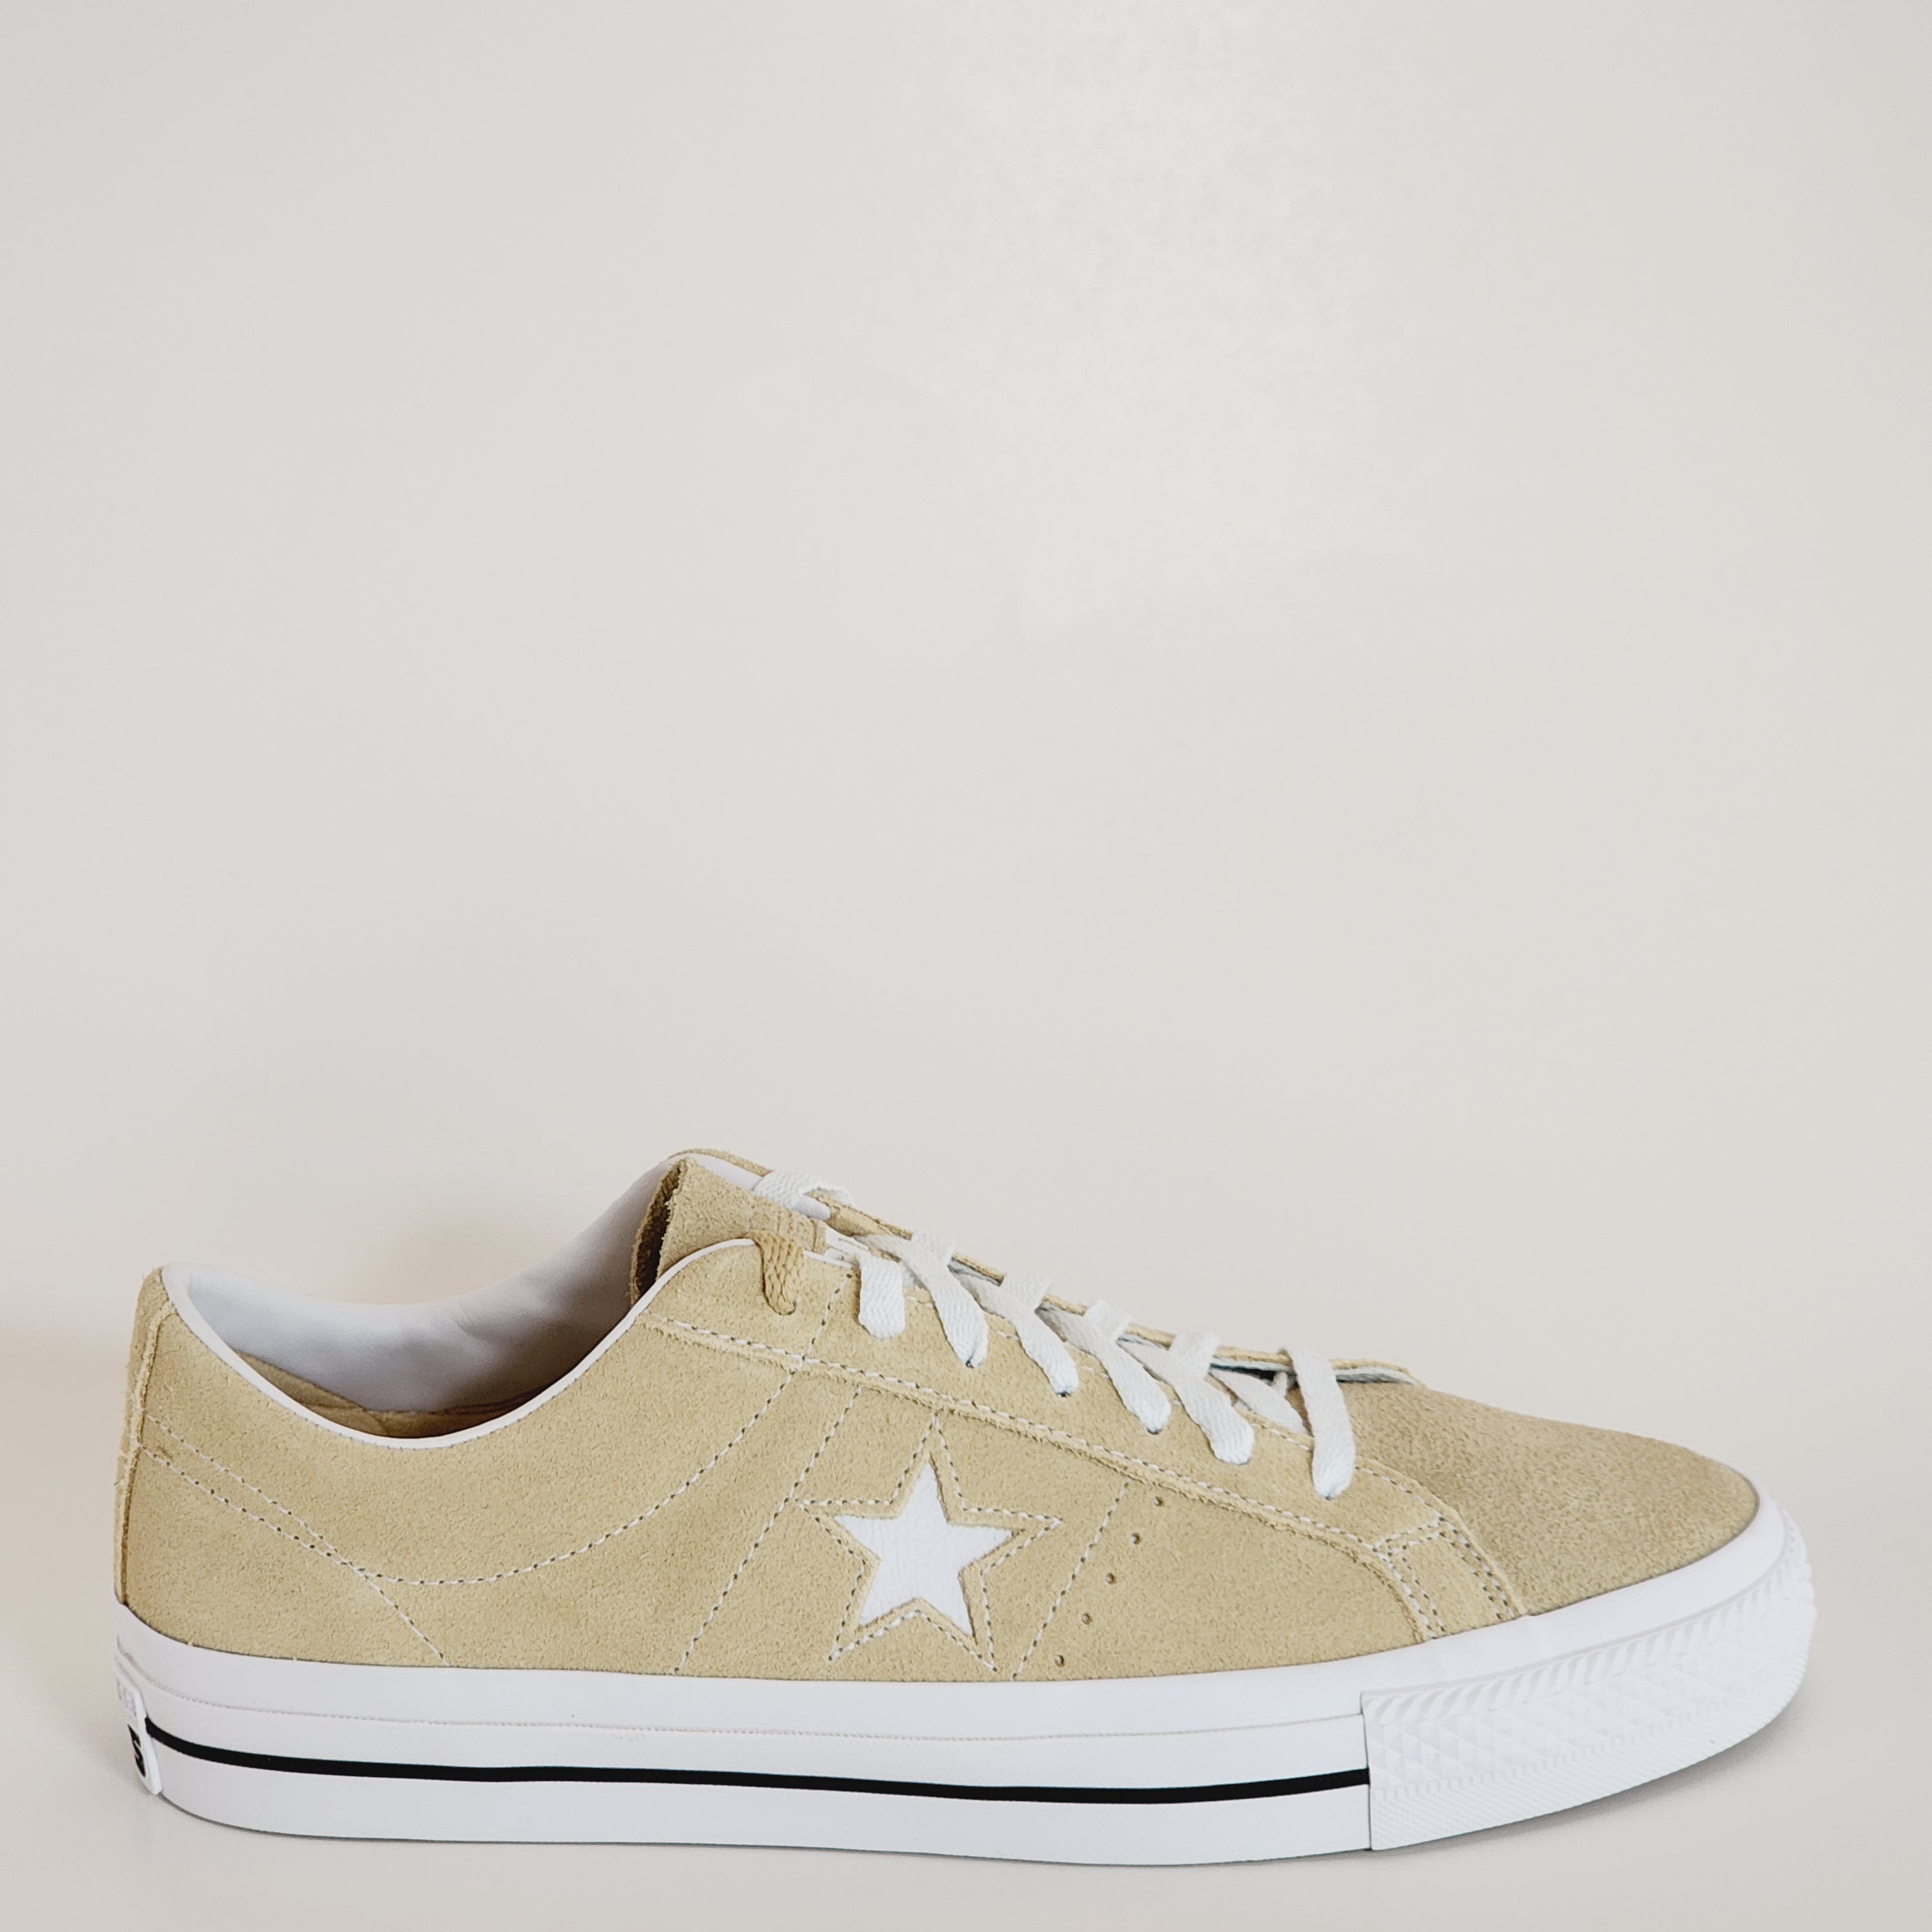 Converse One Star Pro Ox Oat Milk/White/Black Unisex Sneakers A04155C NWT